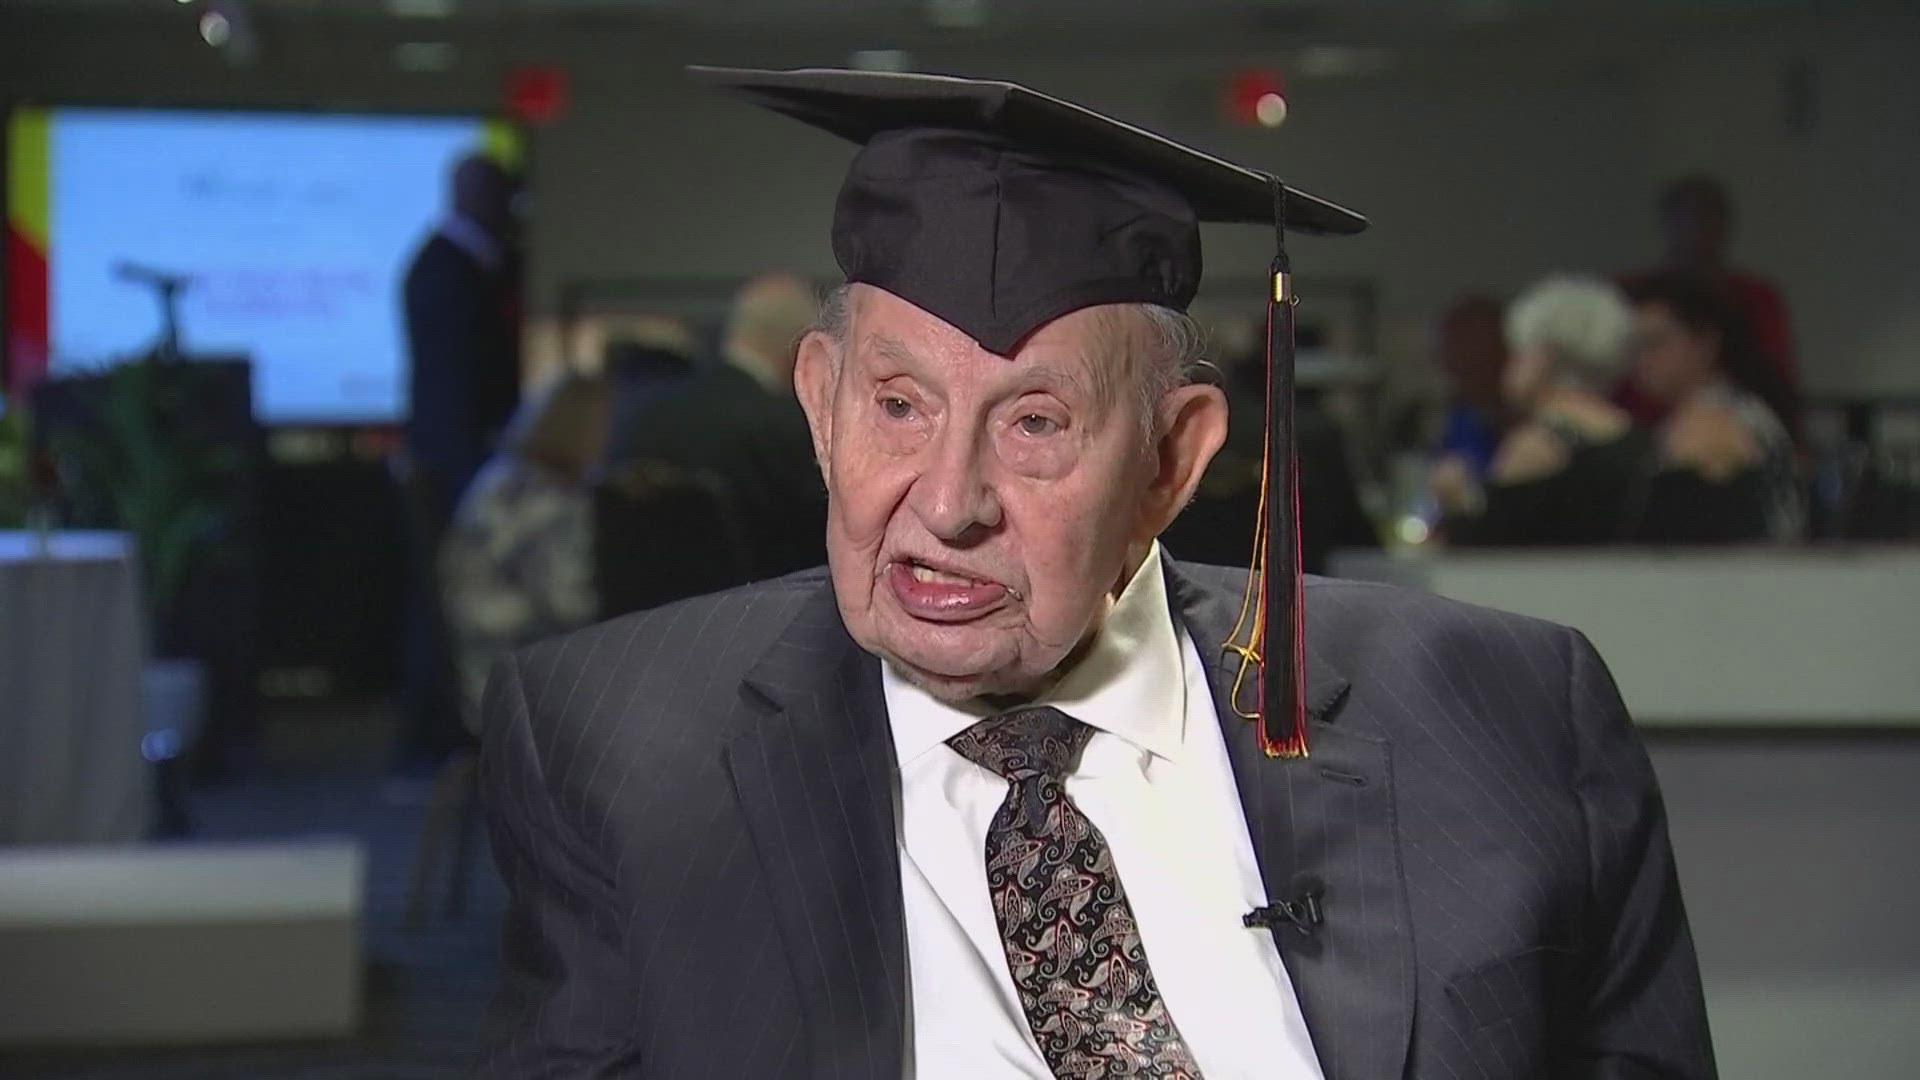 Jack Milton graduated back in 1968 but never got his diploma because he was serving in Vietnam.